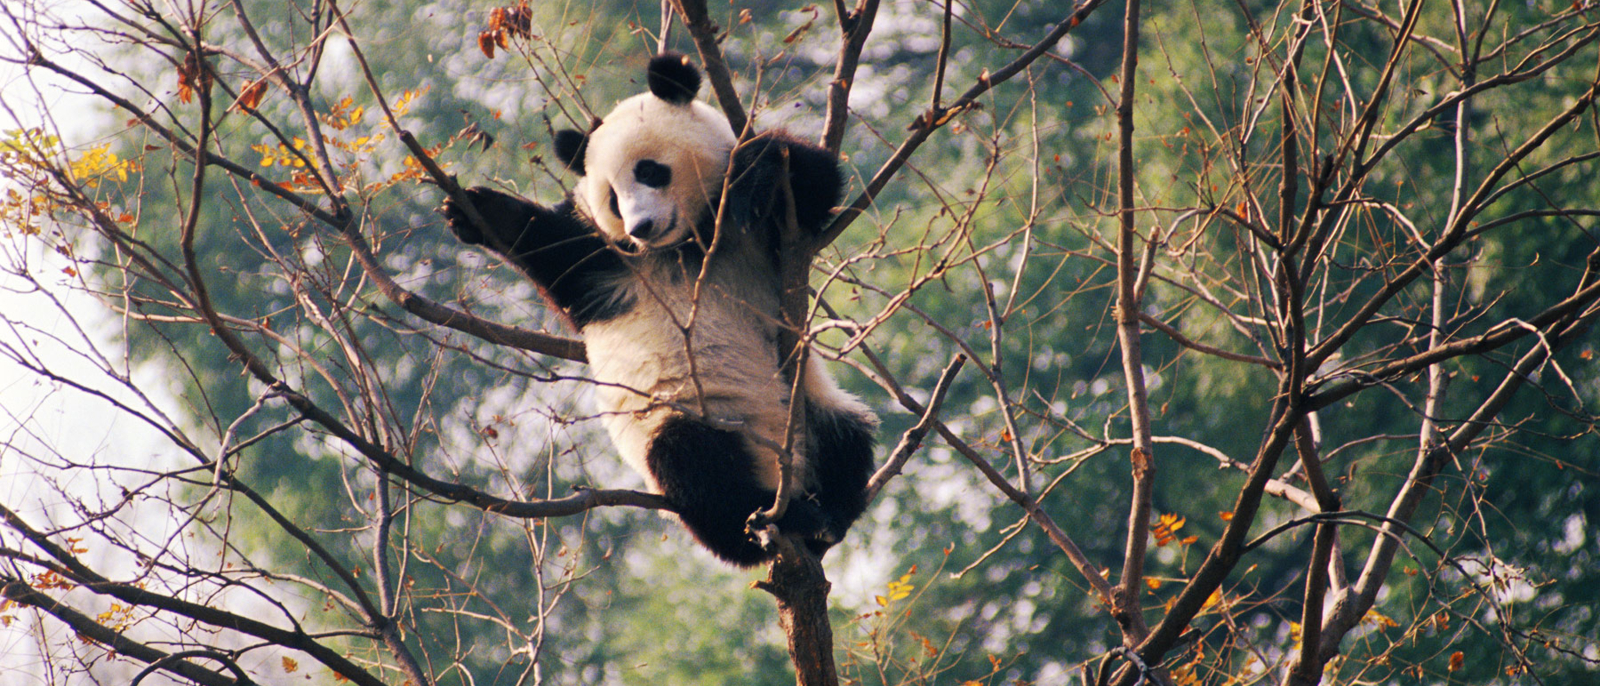 A young Giant Panda in a tree - at a nature reserve near Beijing